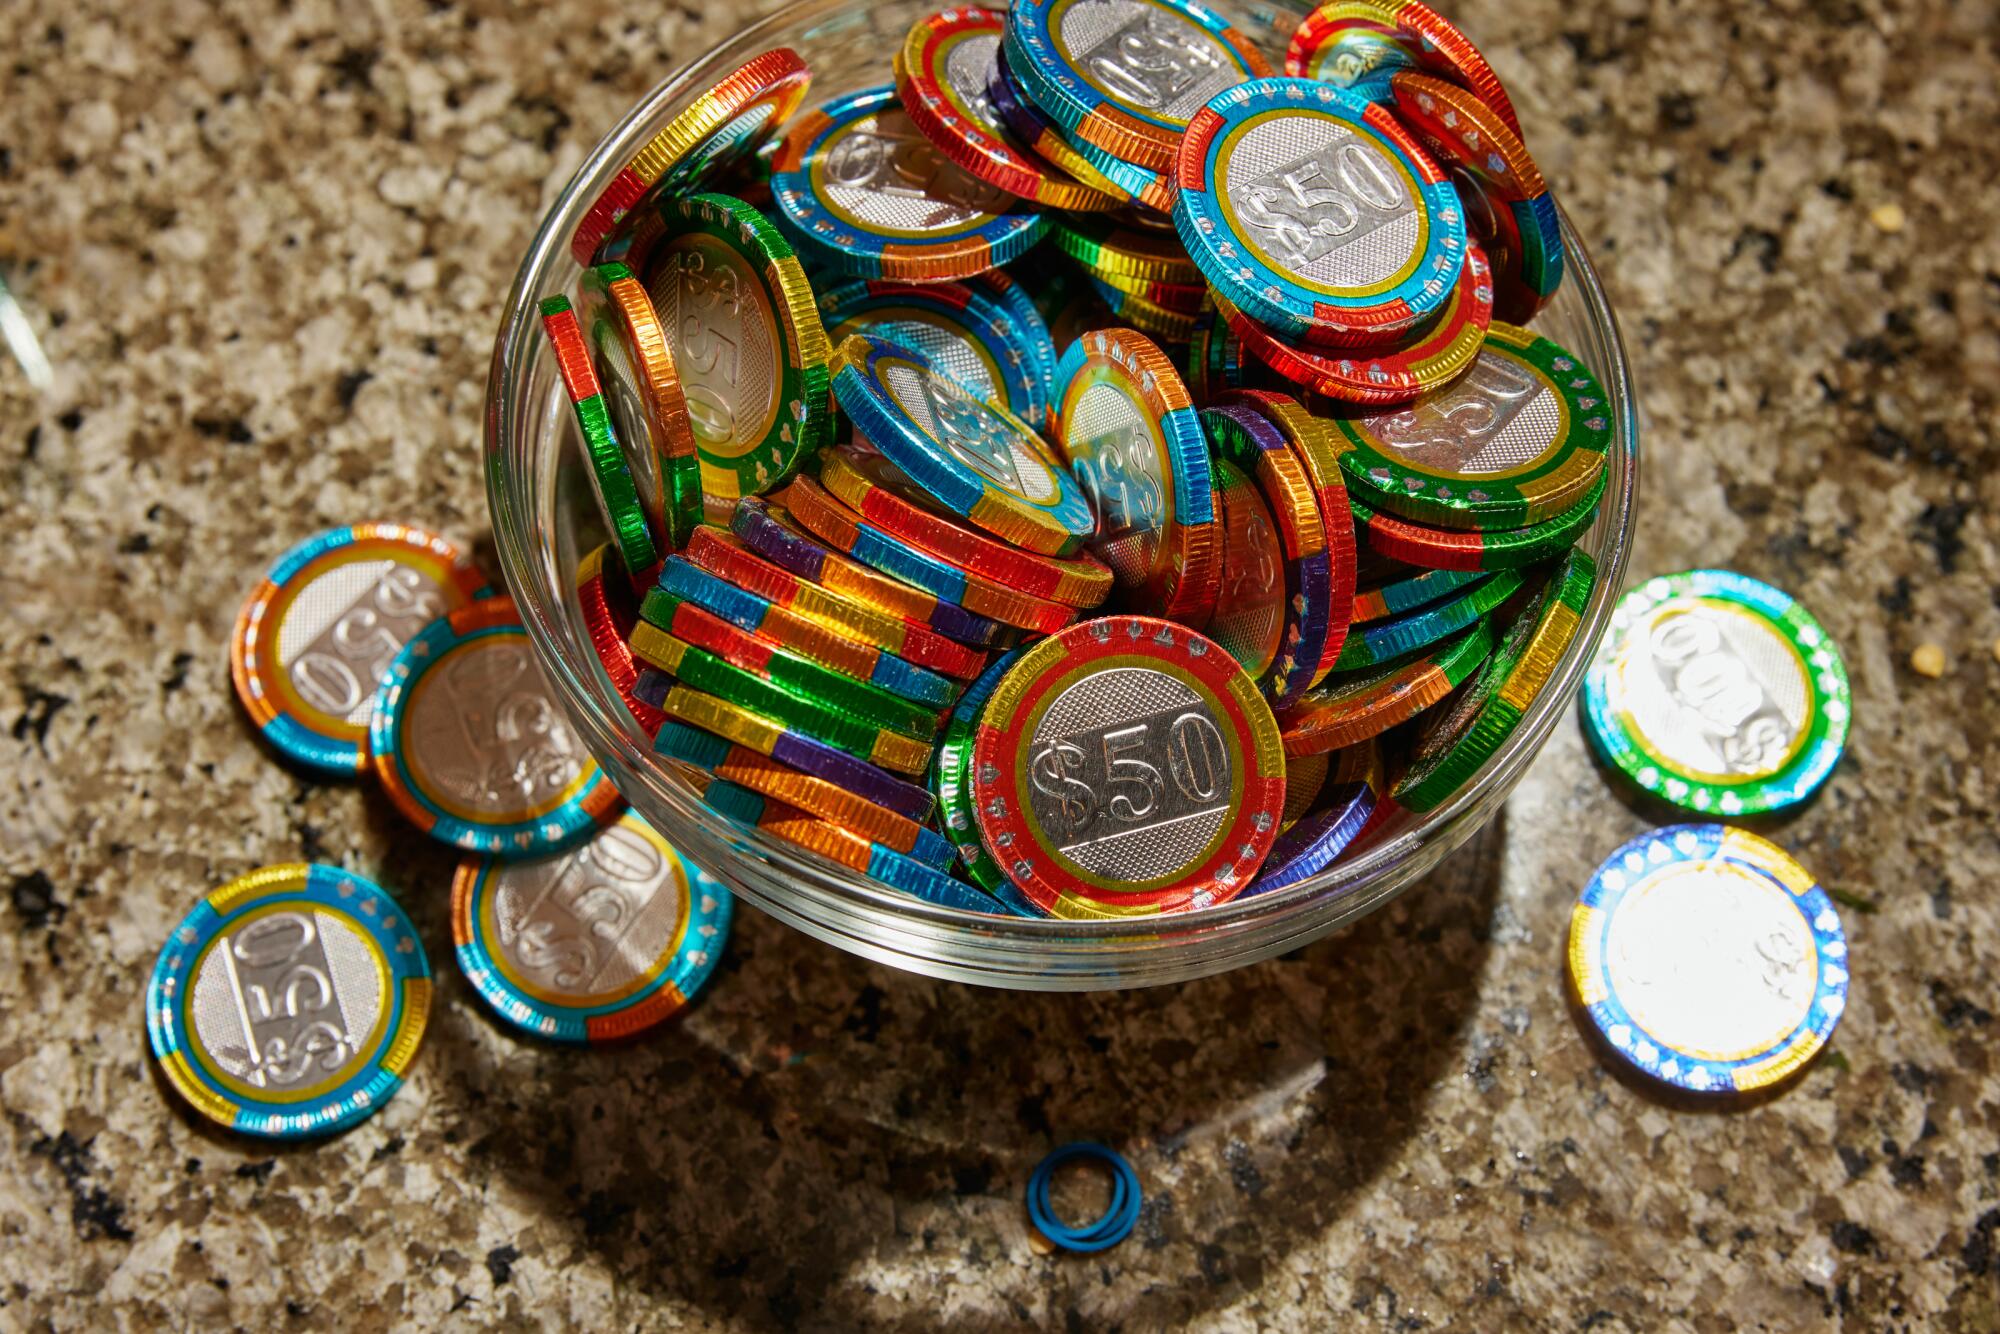 The biggest bluff of the night: chocolate poker chips.